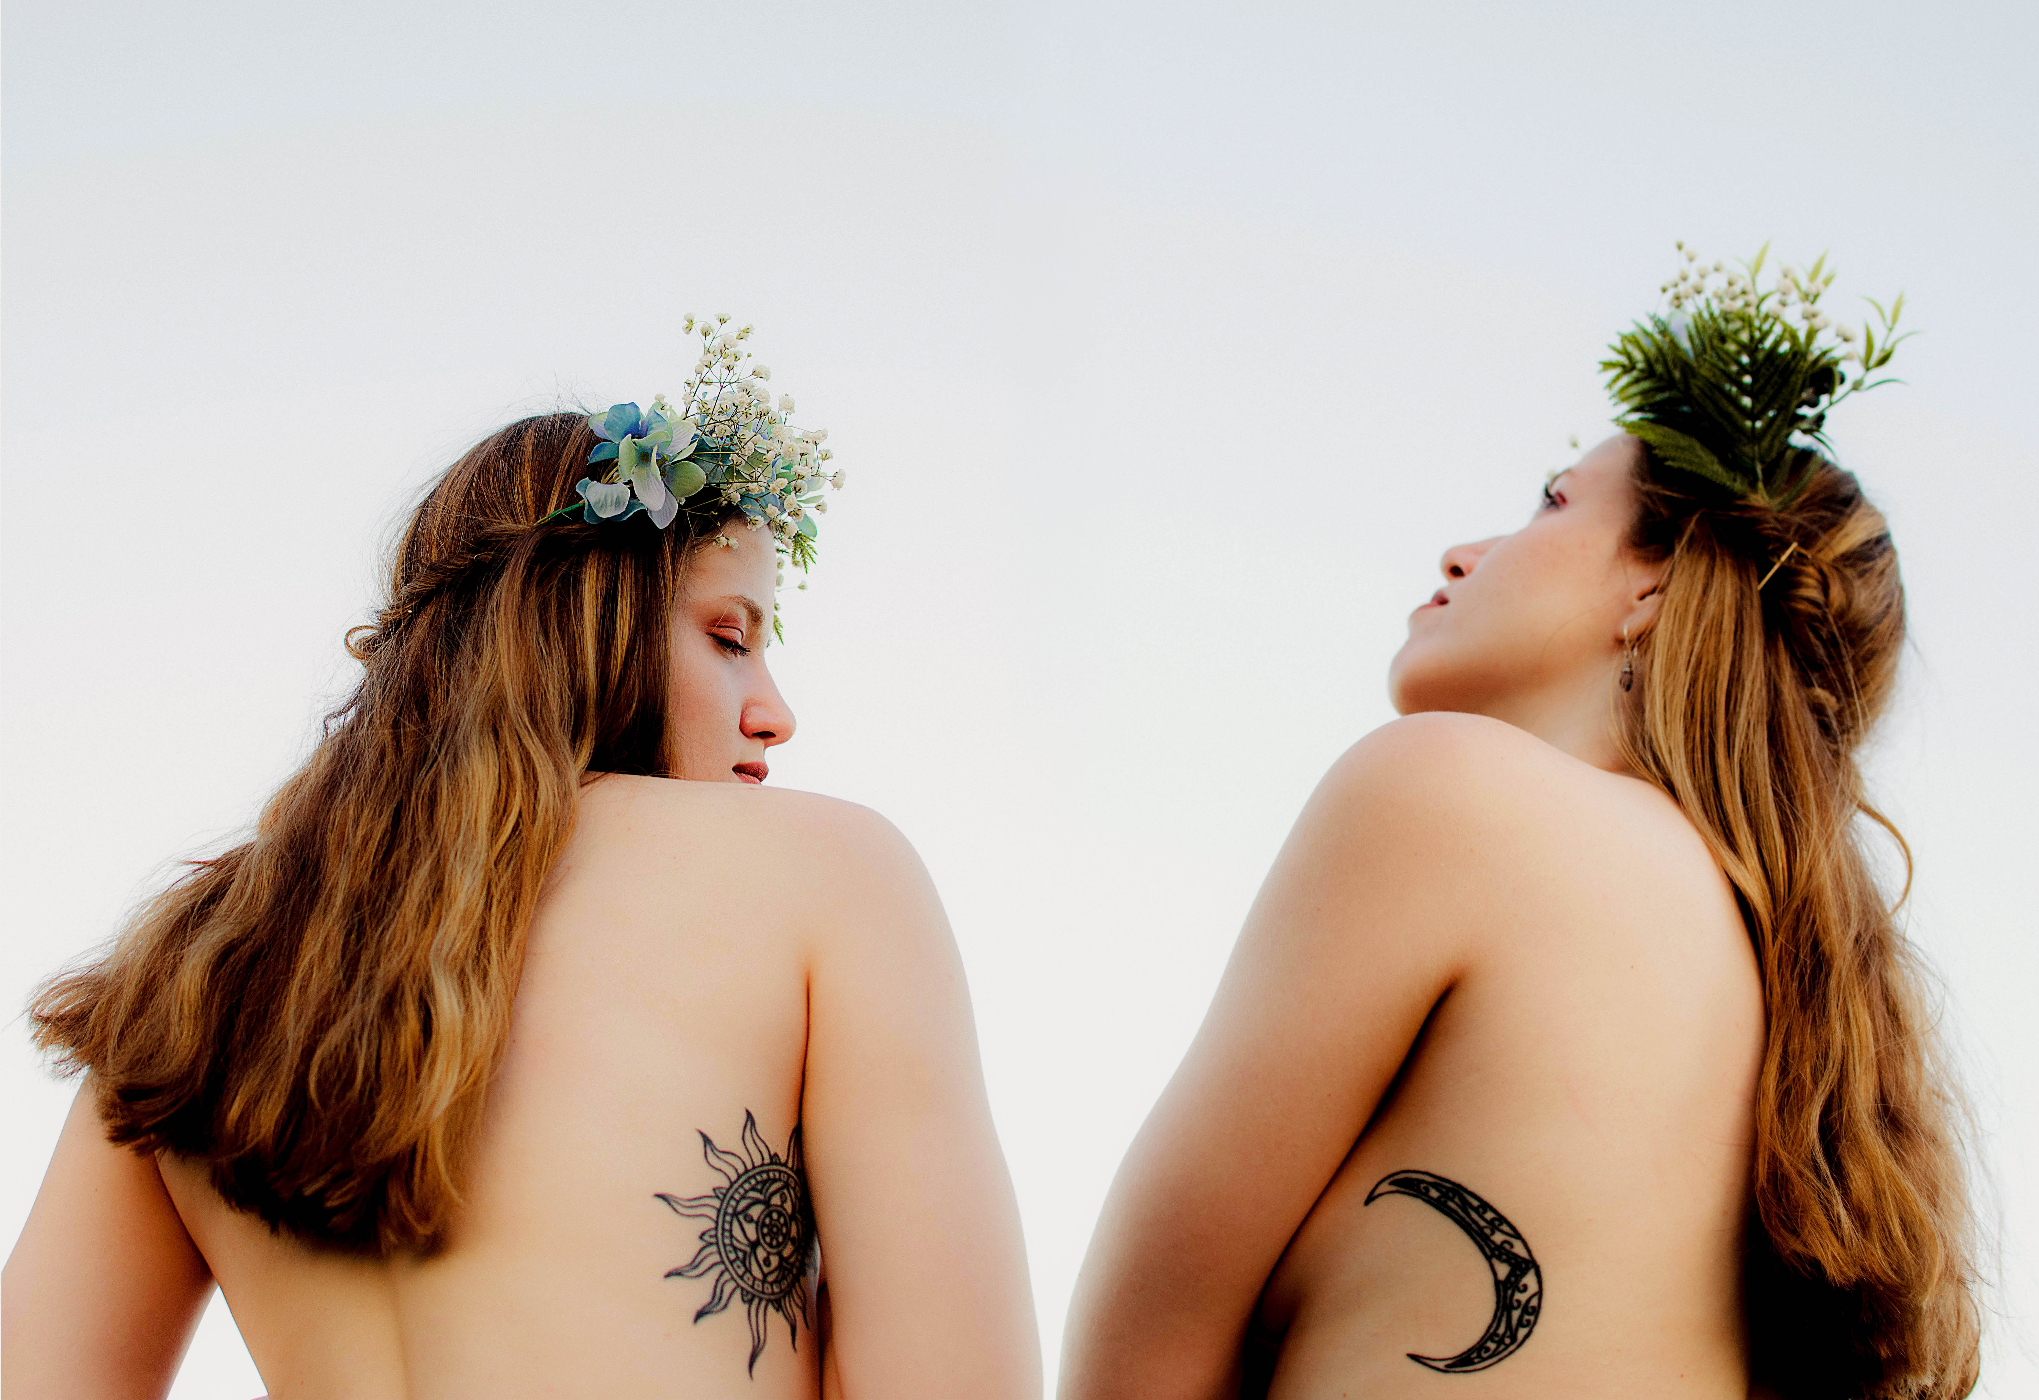 Two woman with tattoos and leaf crowns. | Source: Unsplash